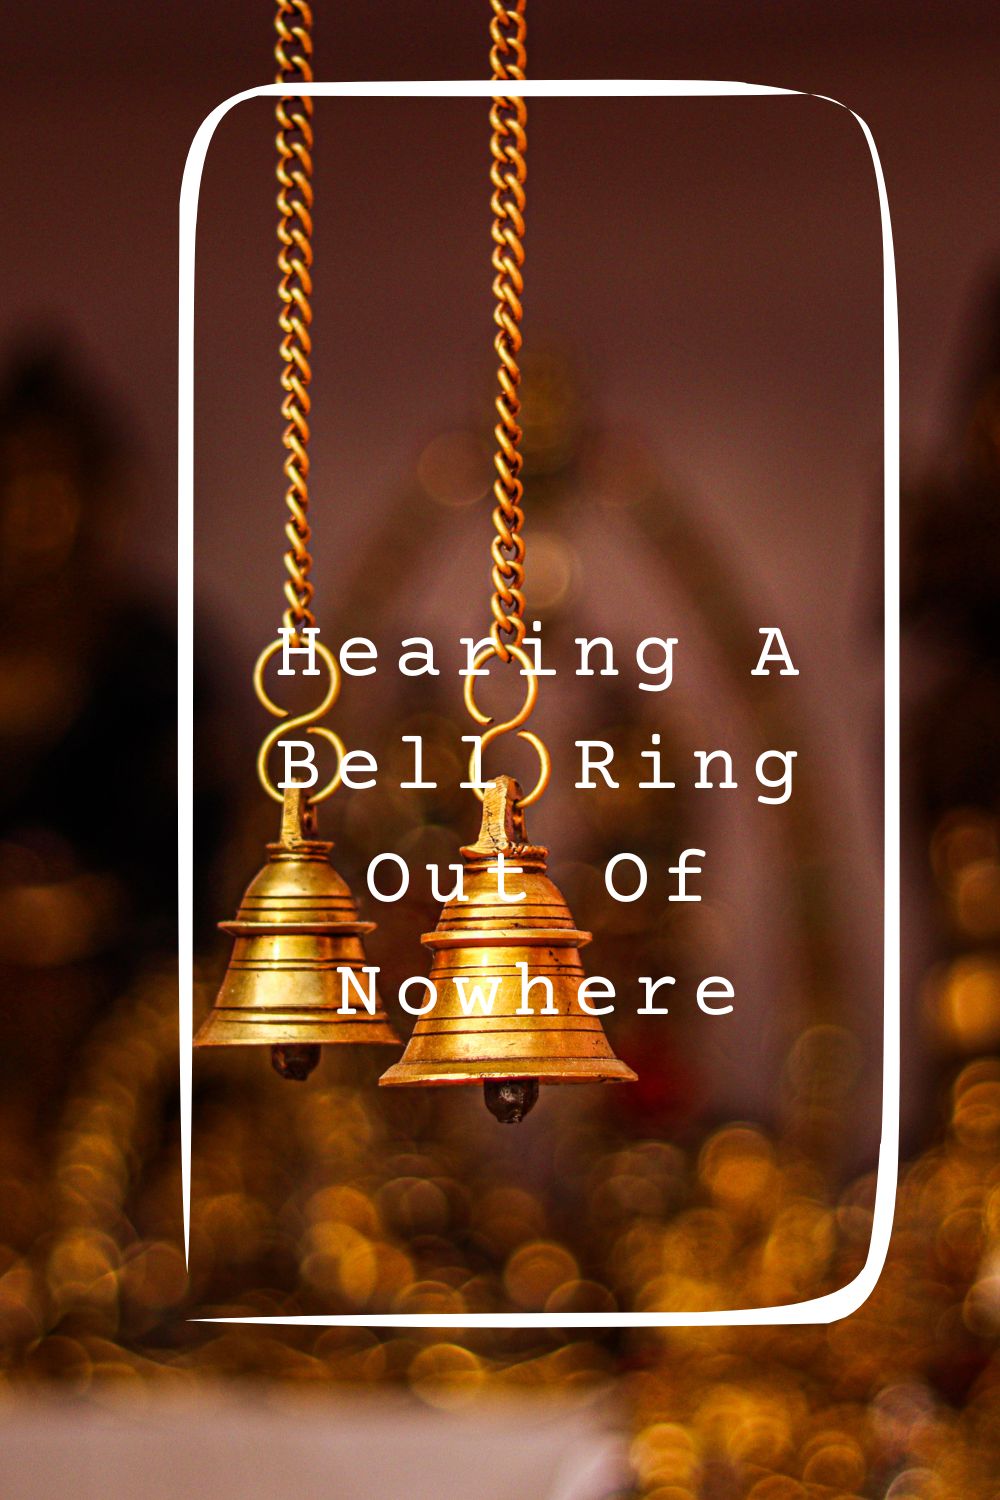 Significance of ringing a bell in puja ritual